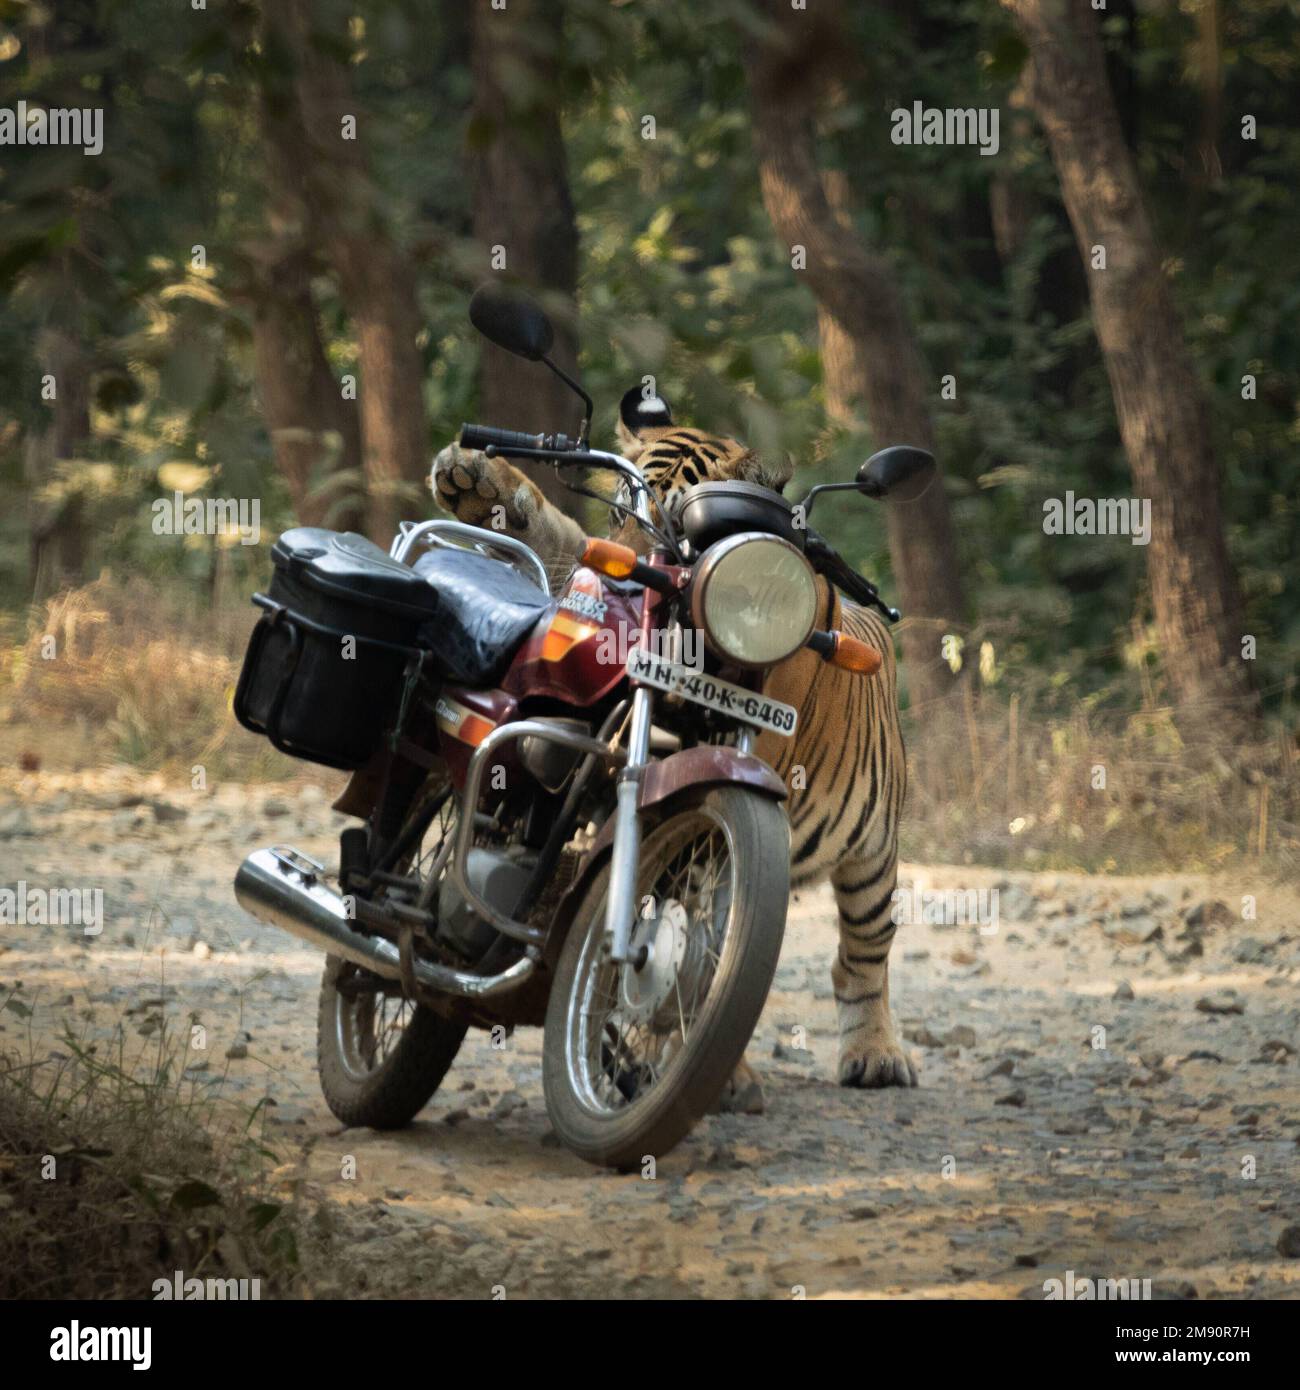 A tentative pat. India: THESE INCREDIBLE images show how curious tigers can delay bikers from getting home while examining their motorbikes. One image Stock Photo